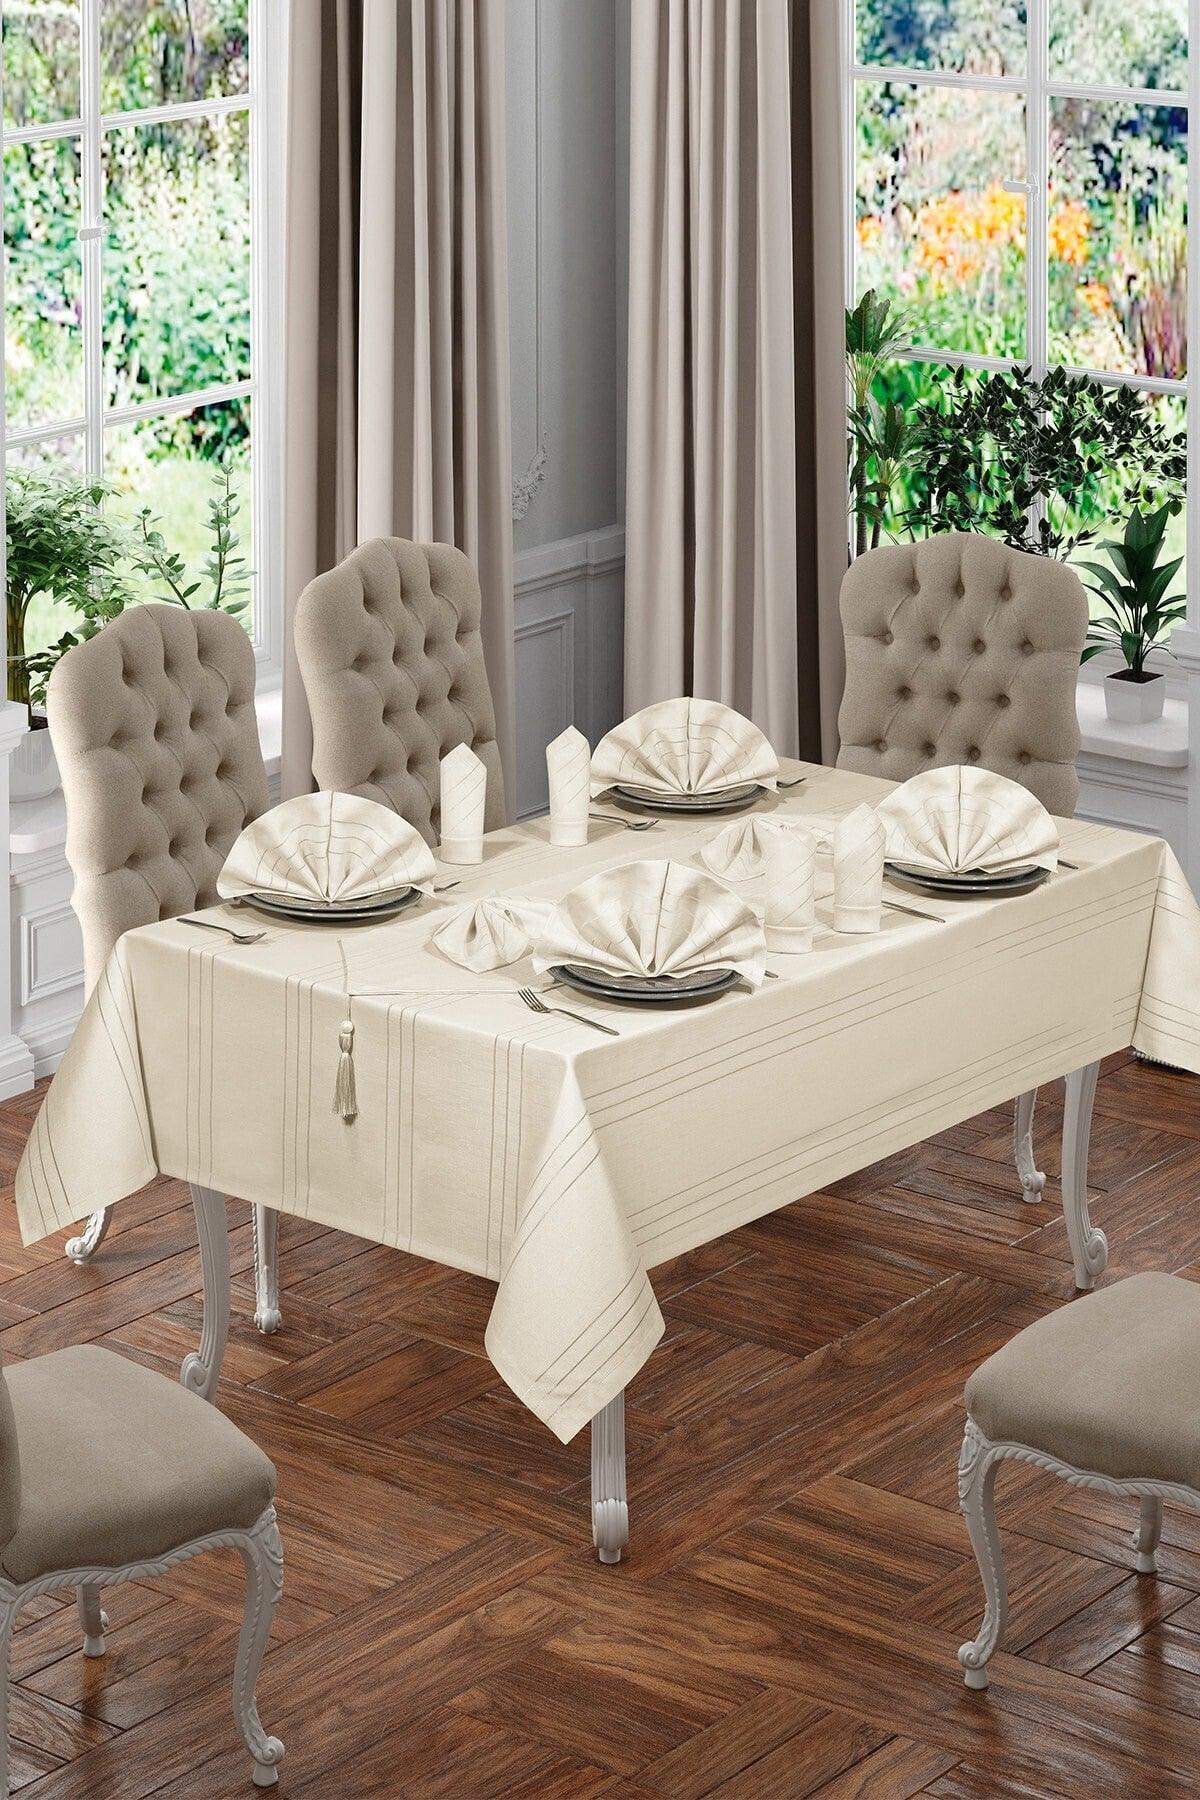 Luxury Colber Table Cloth Set 12 Person Colber (cream) - Swordslife